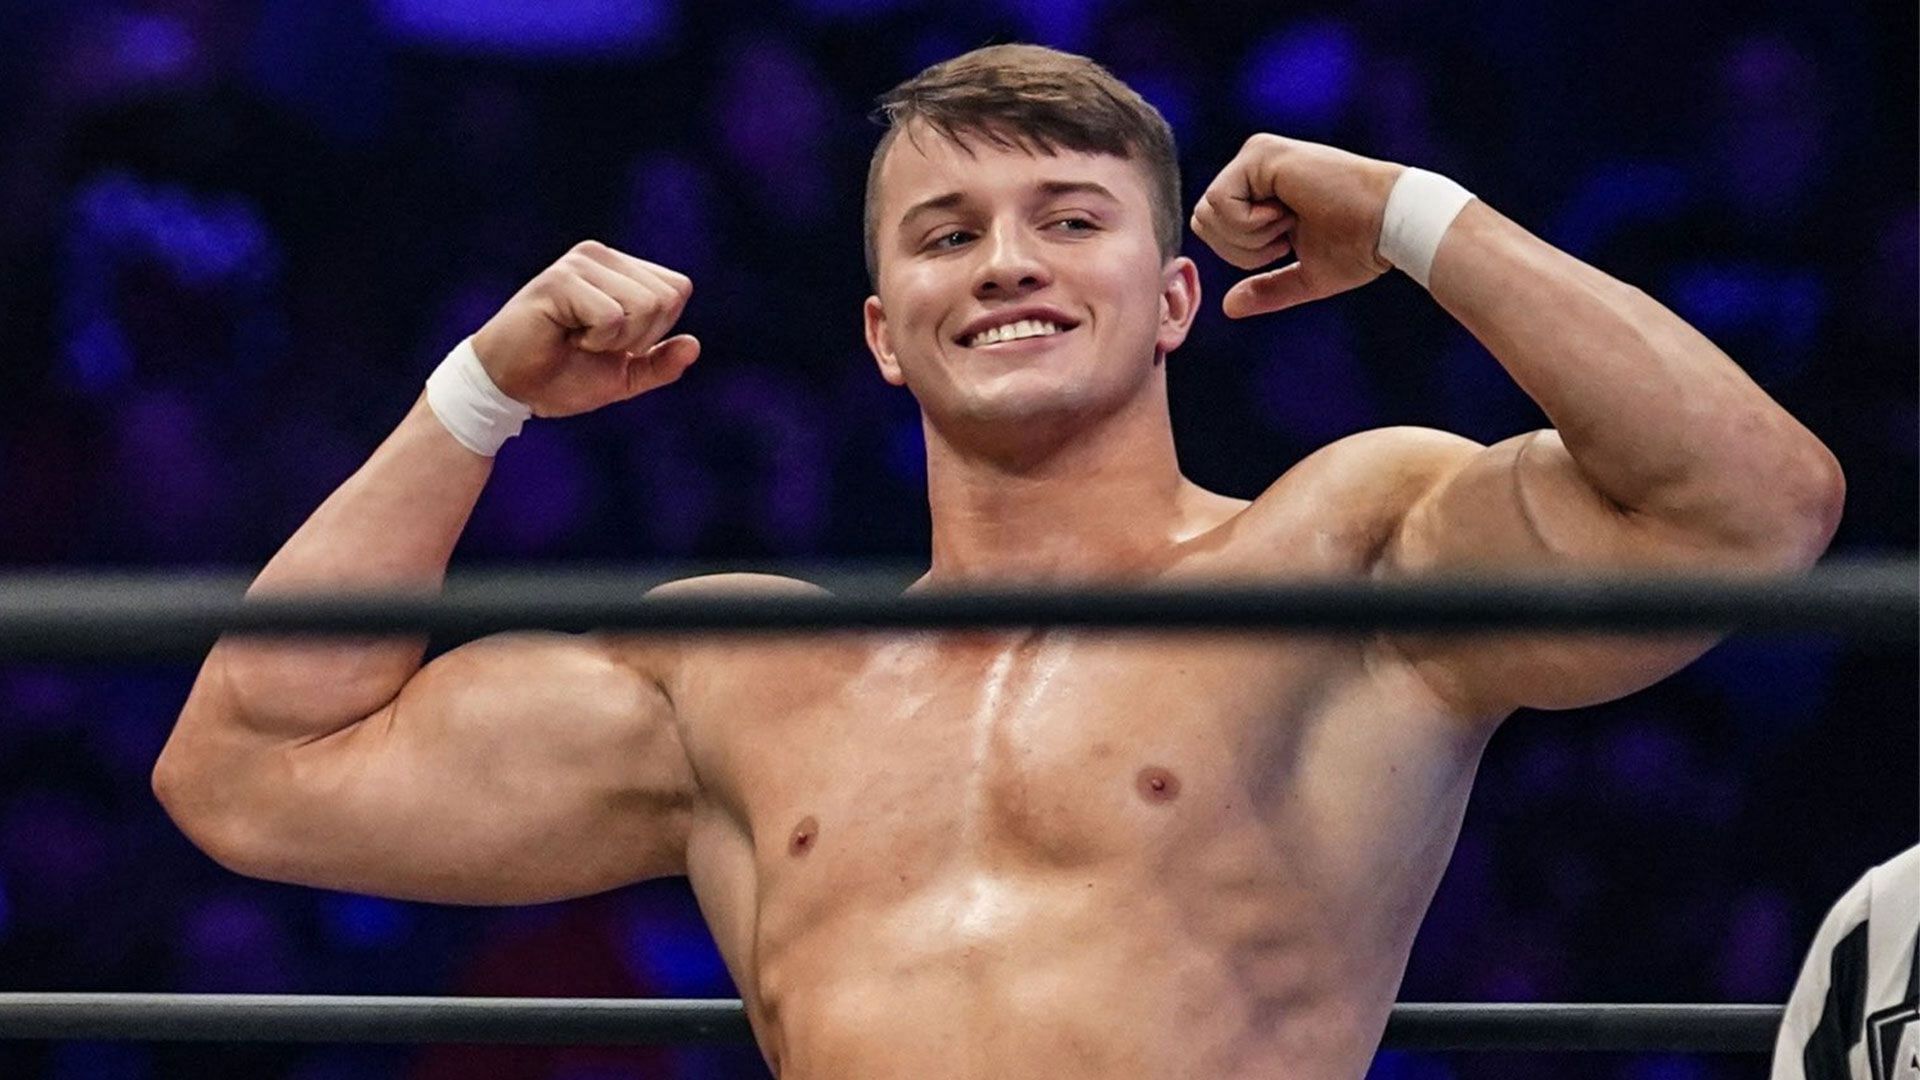 Cole McKinney competed in several AEW matches